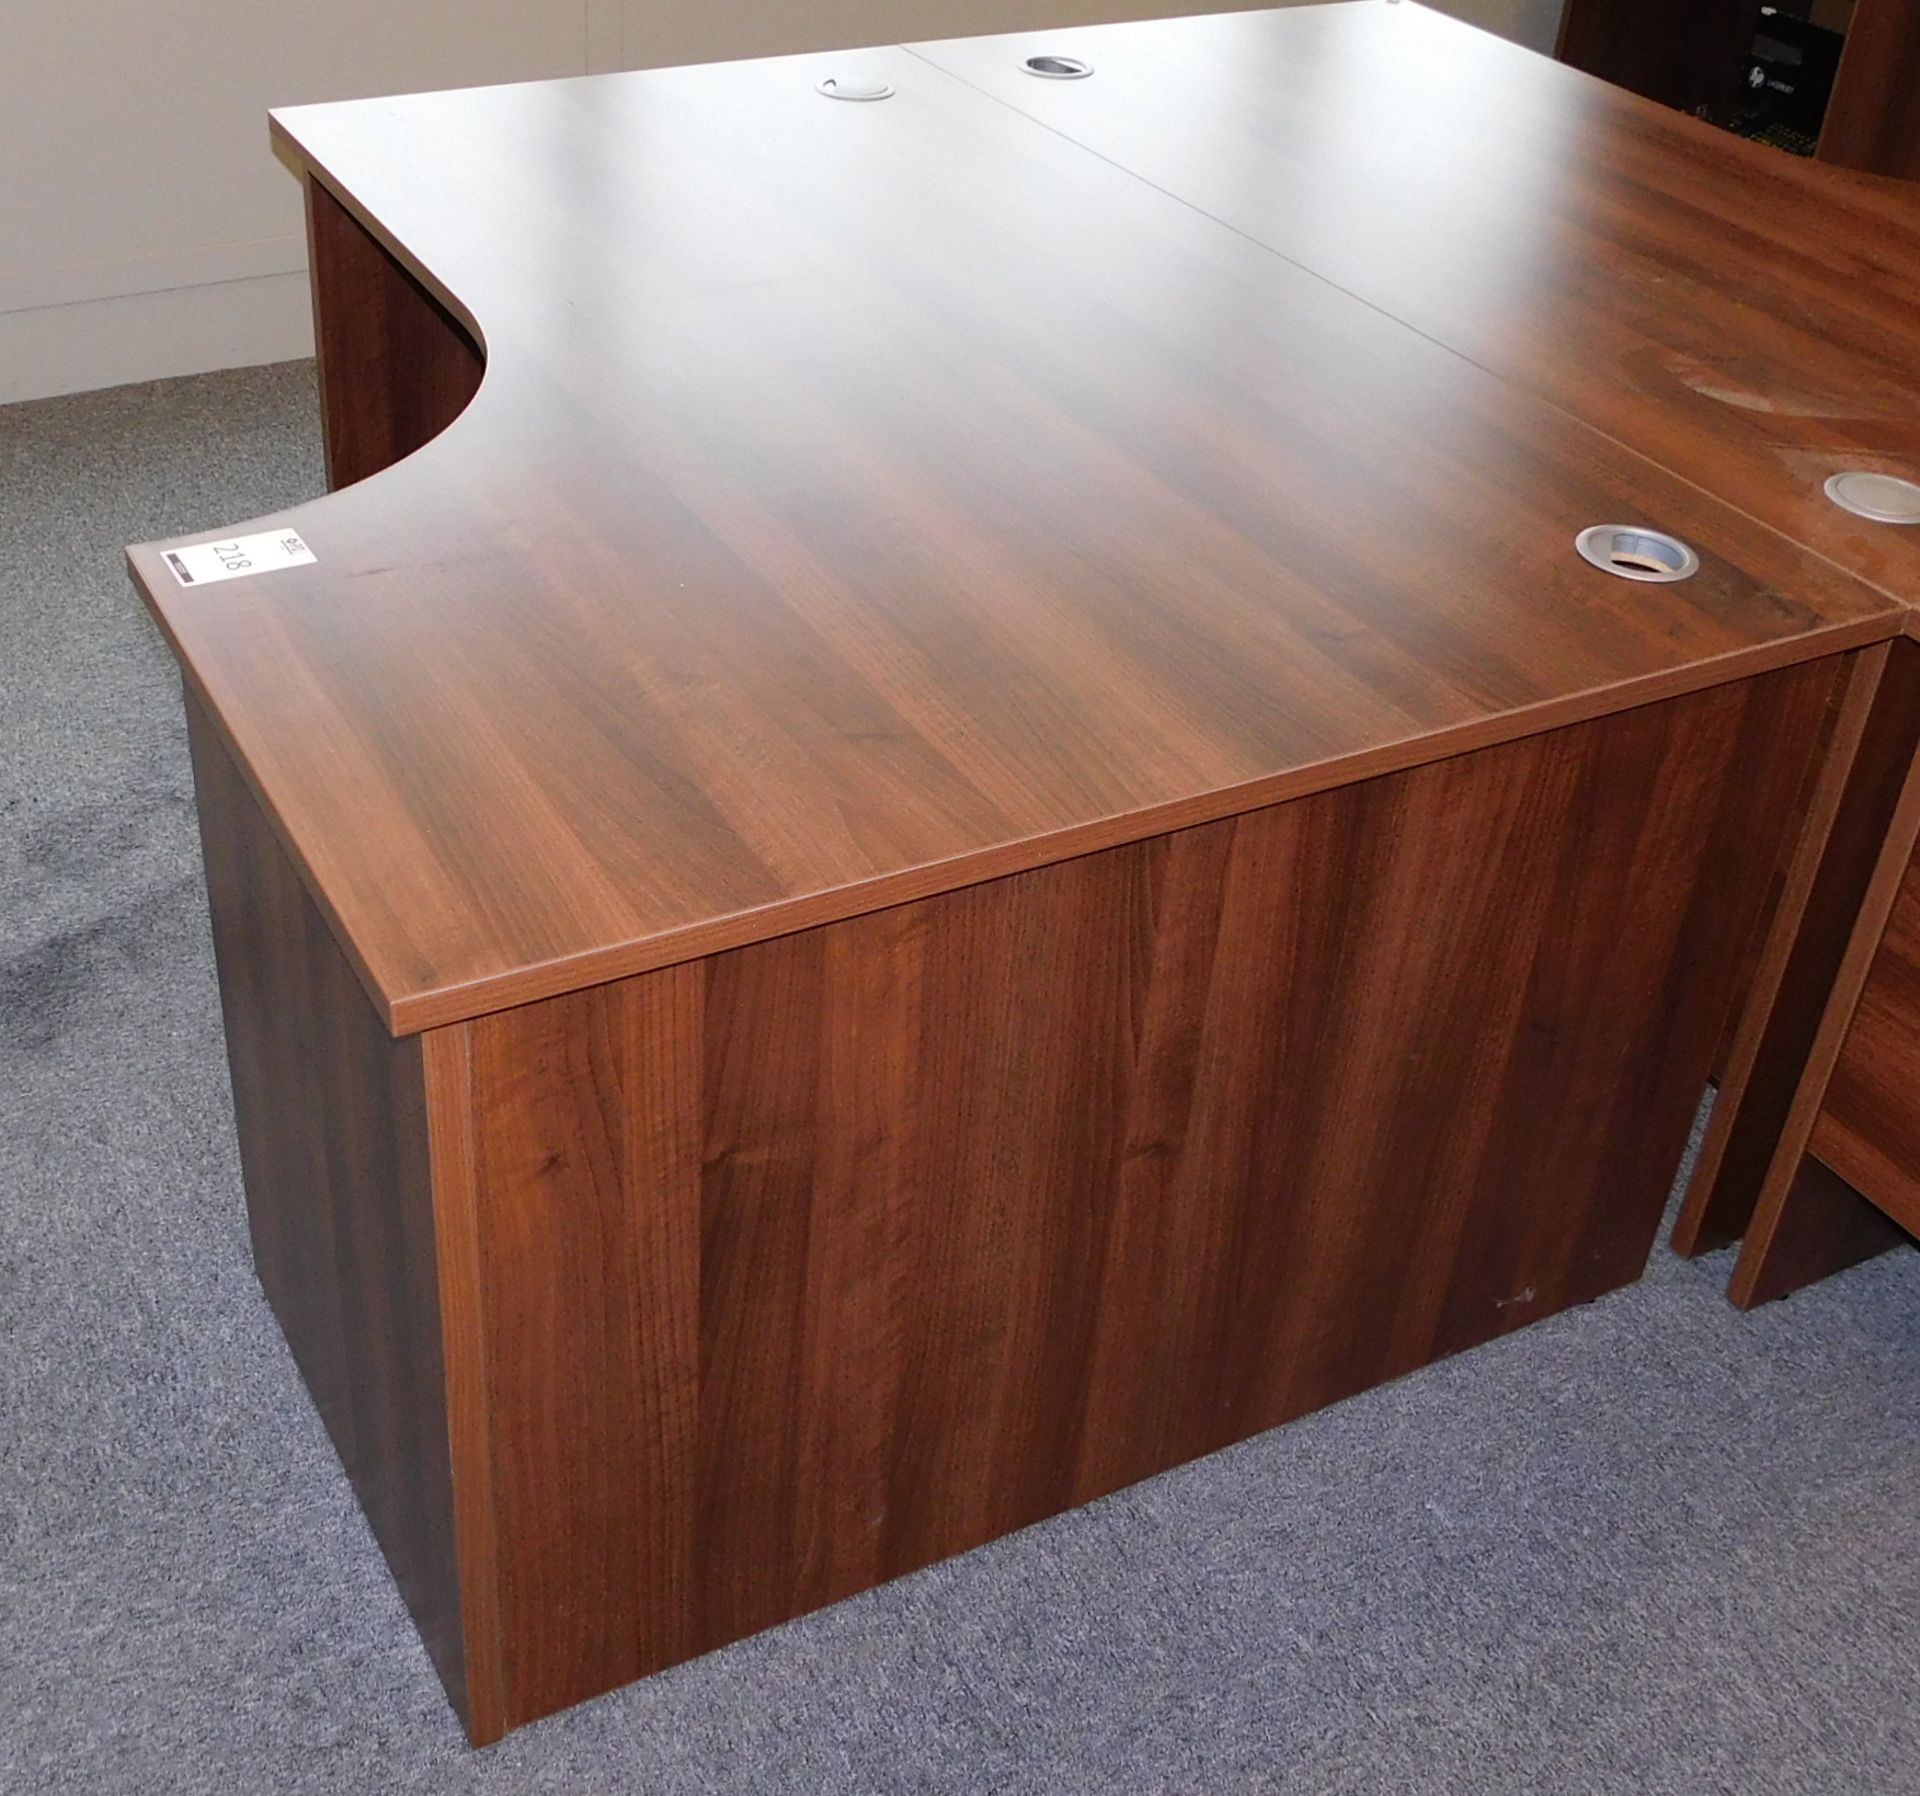 American Walnut Effect Shaped Workstation 160cm x 120cm with Matching 3-Drawer Pedestal (Located - Image 2 of 3